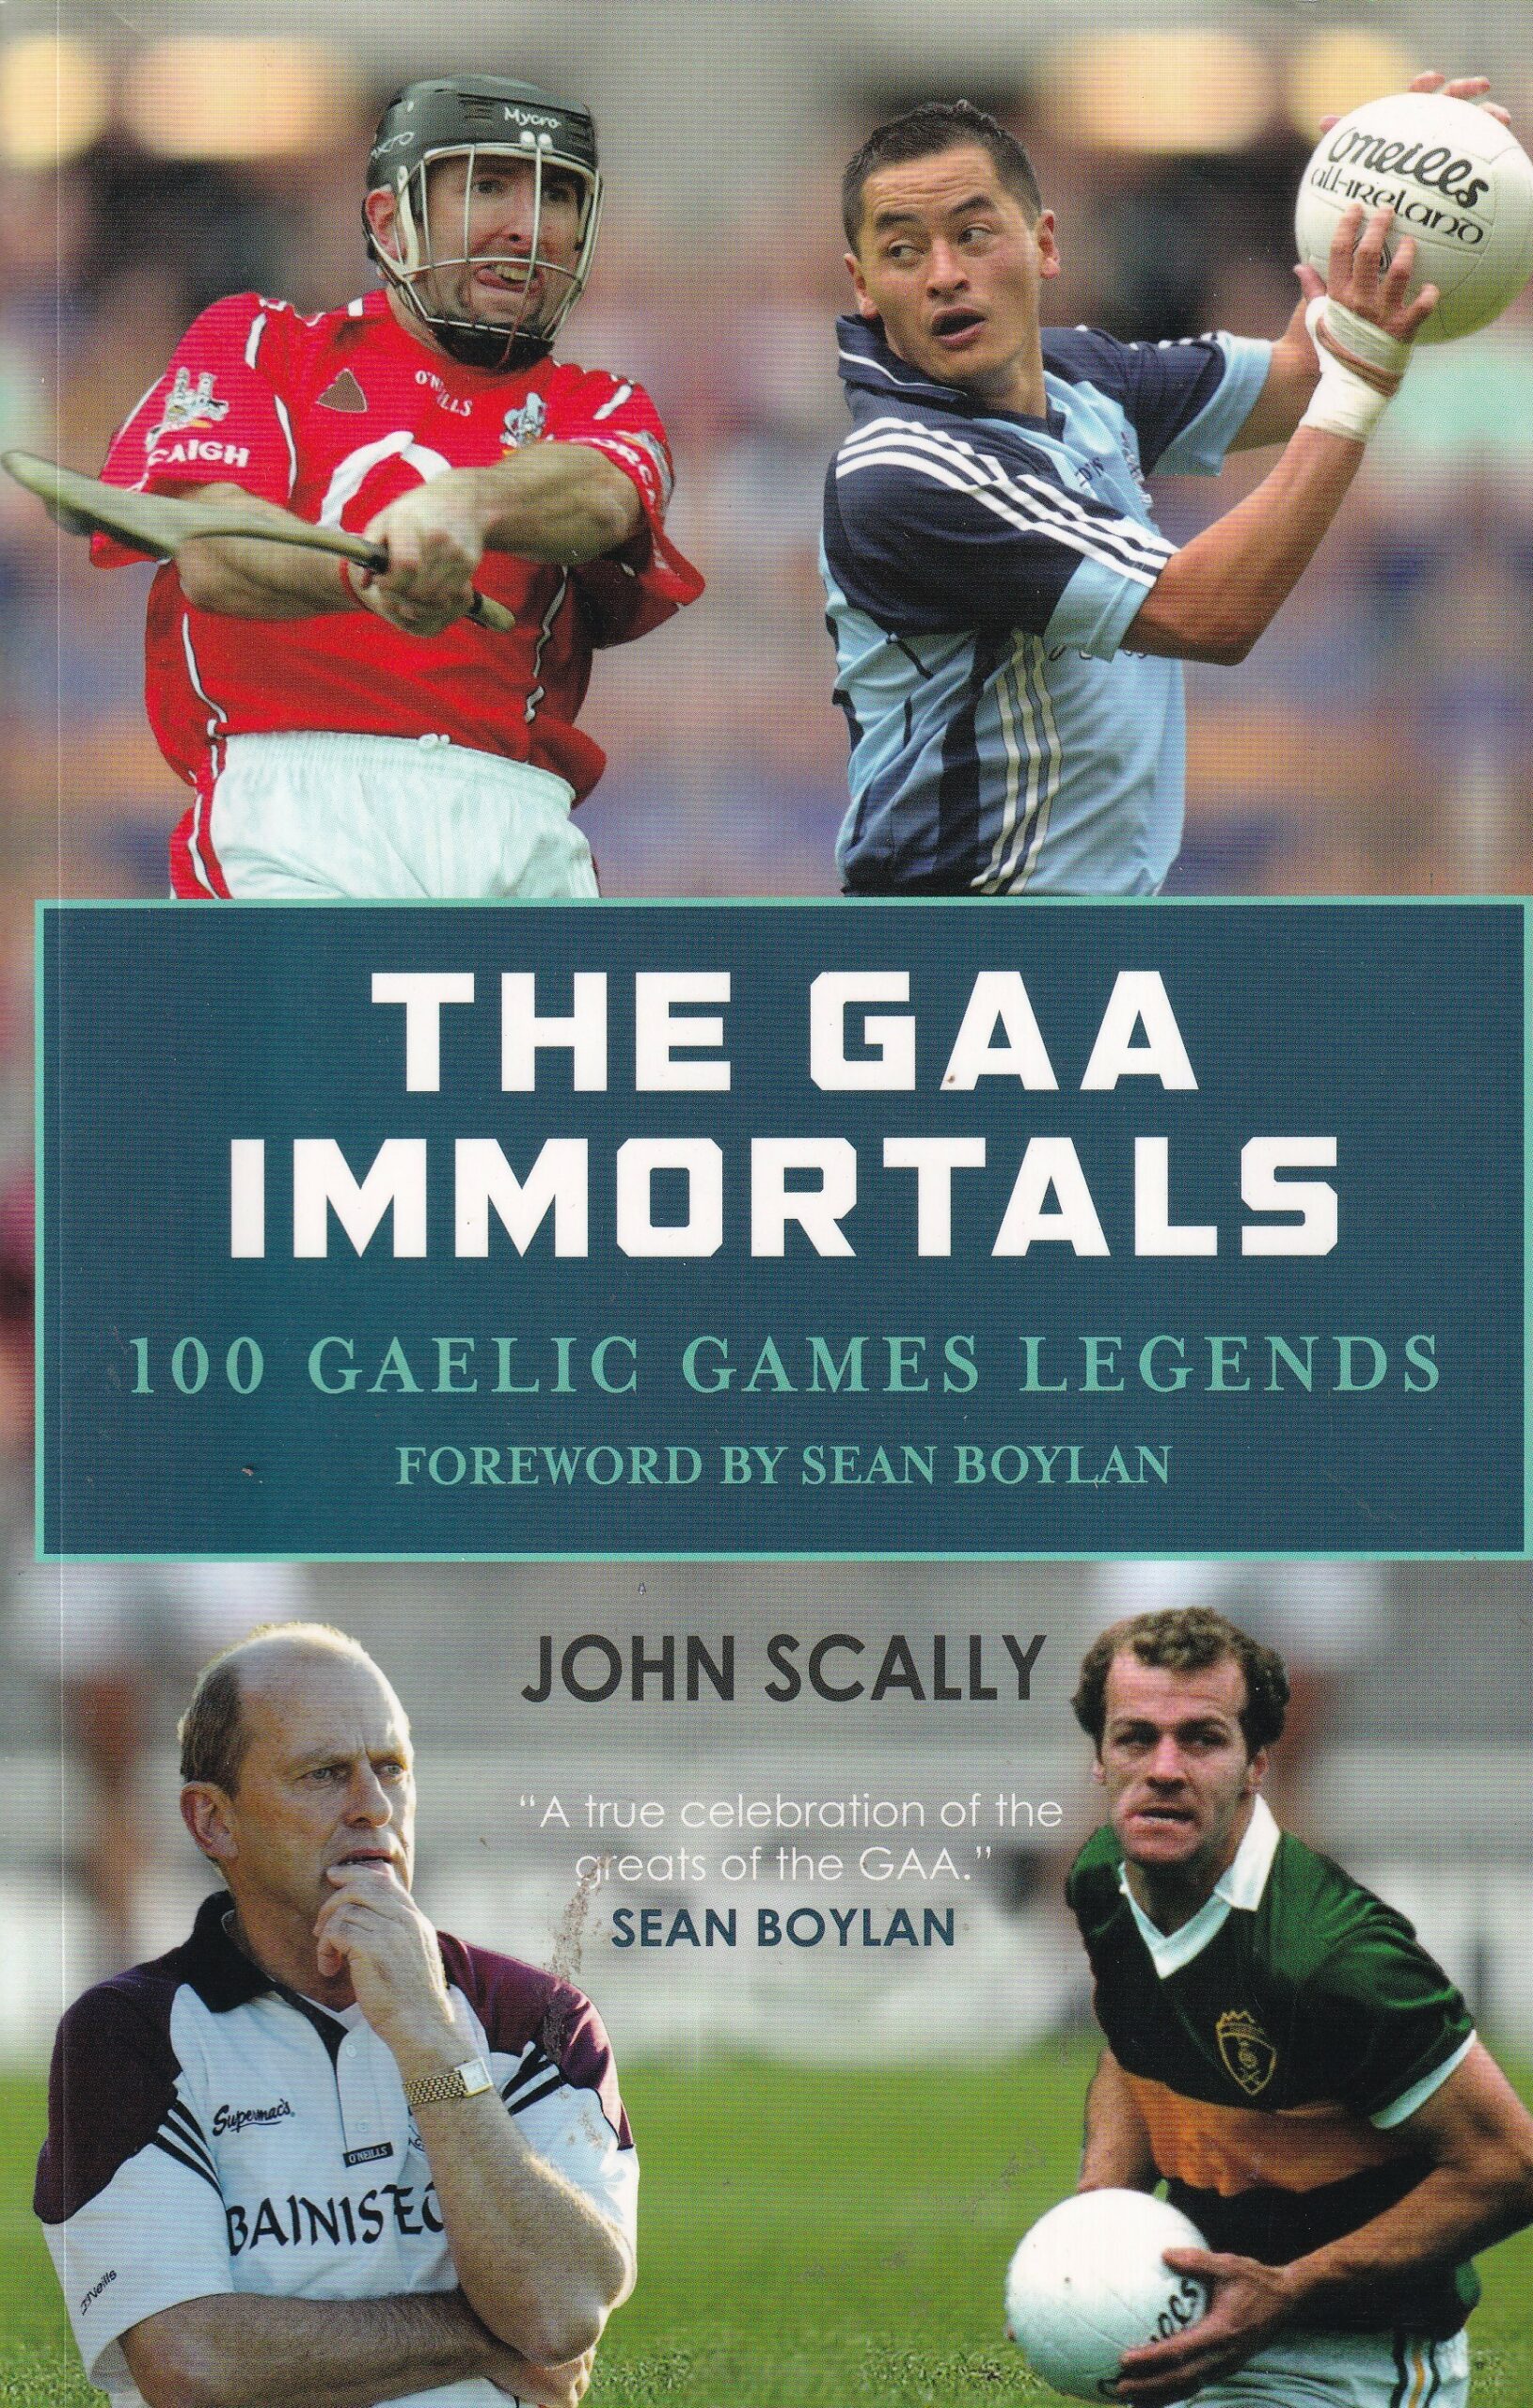 The GAA Immortals: 100 Gaelic Games Legends | John Scally | Charlie Byrne's